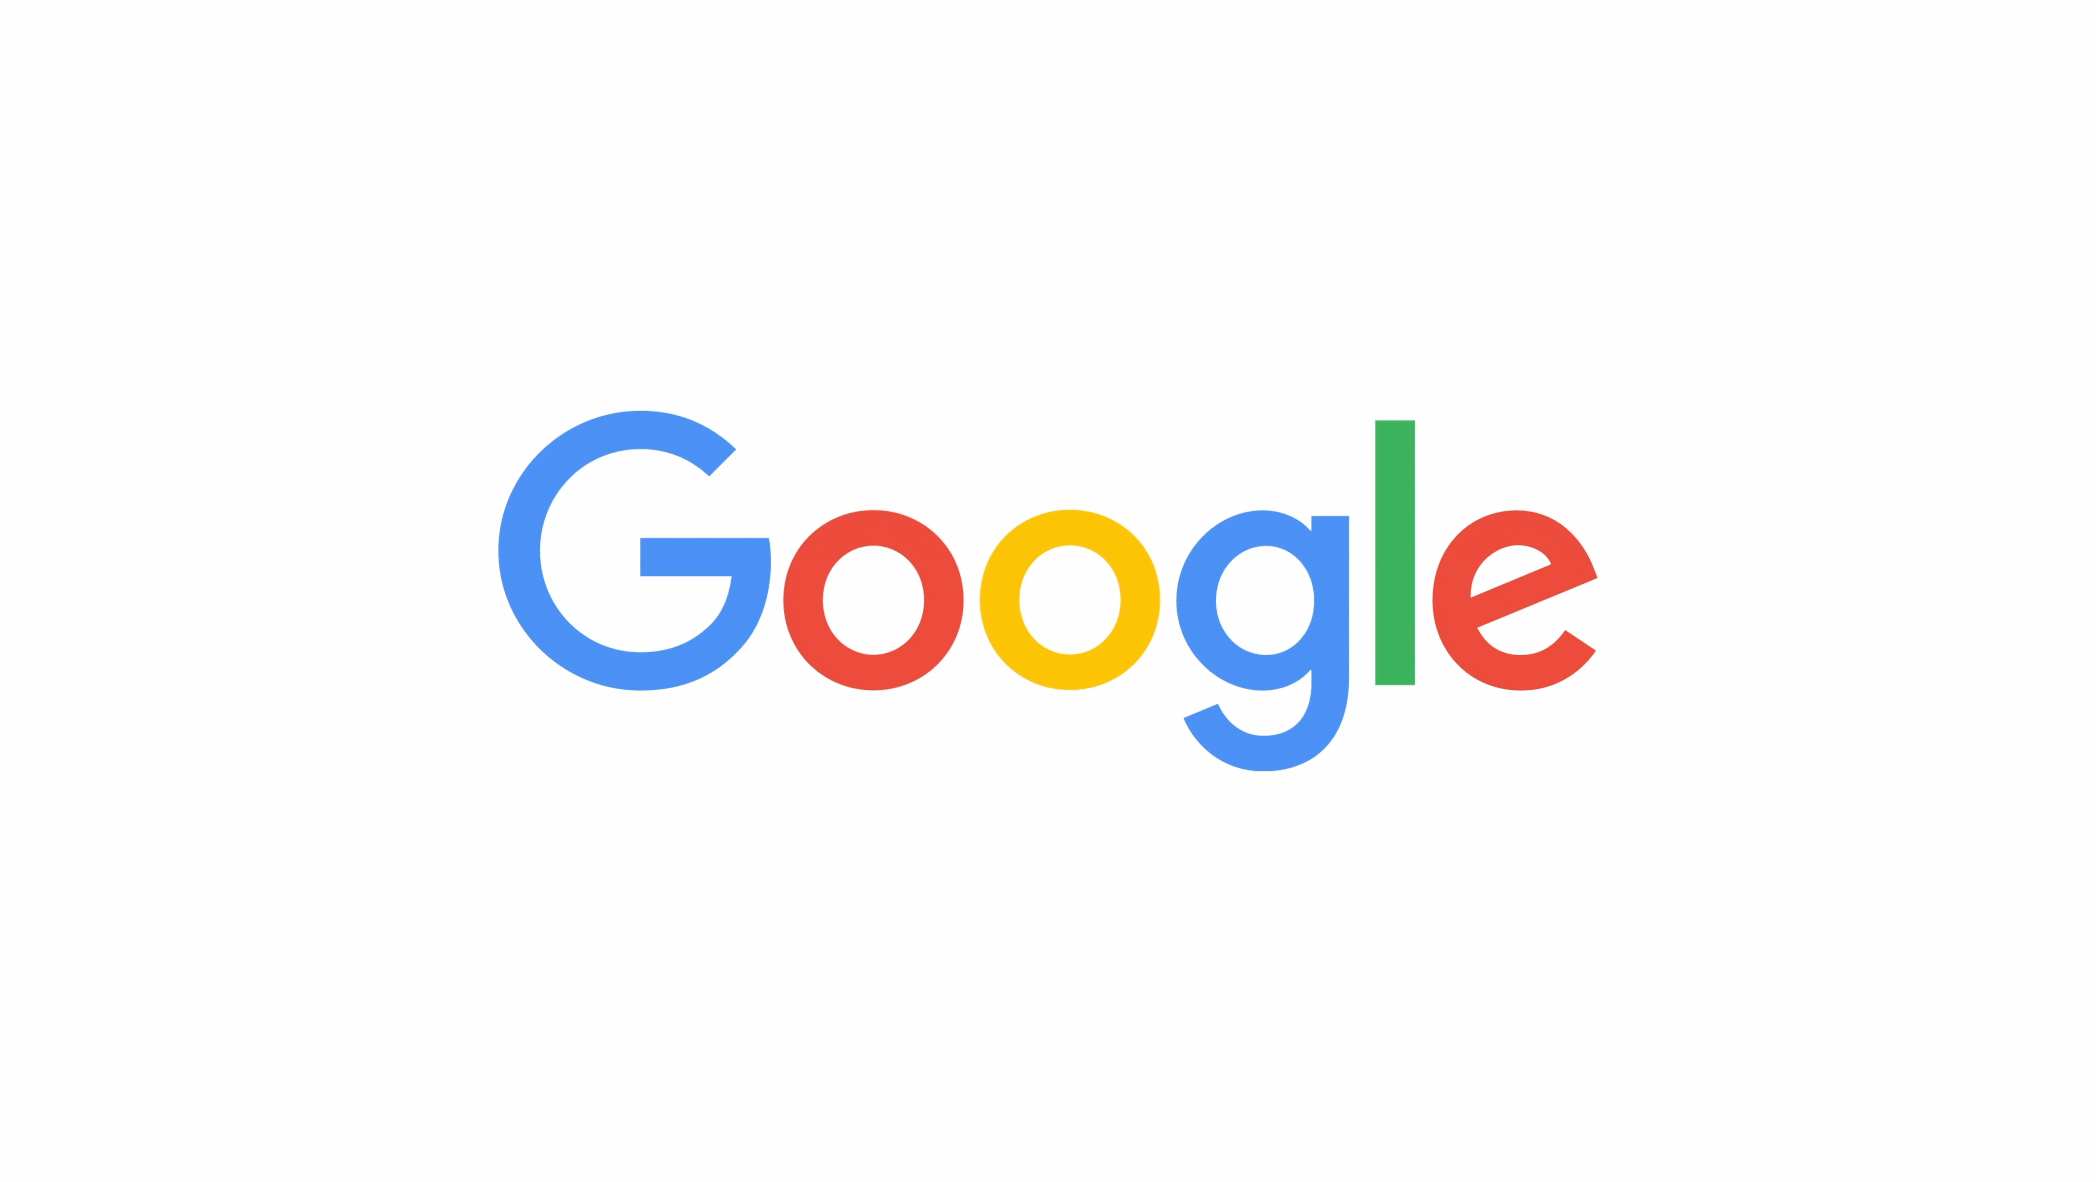 GIF showing the two “o’s” in the Google logo transforming into “25.” In the background are various numbers, like 1.5x, 30 and 133.